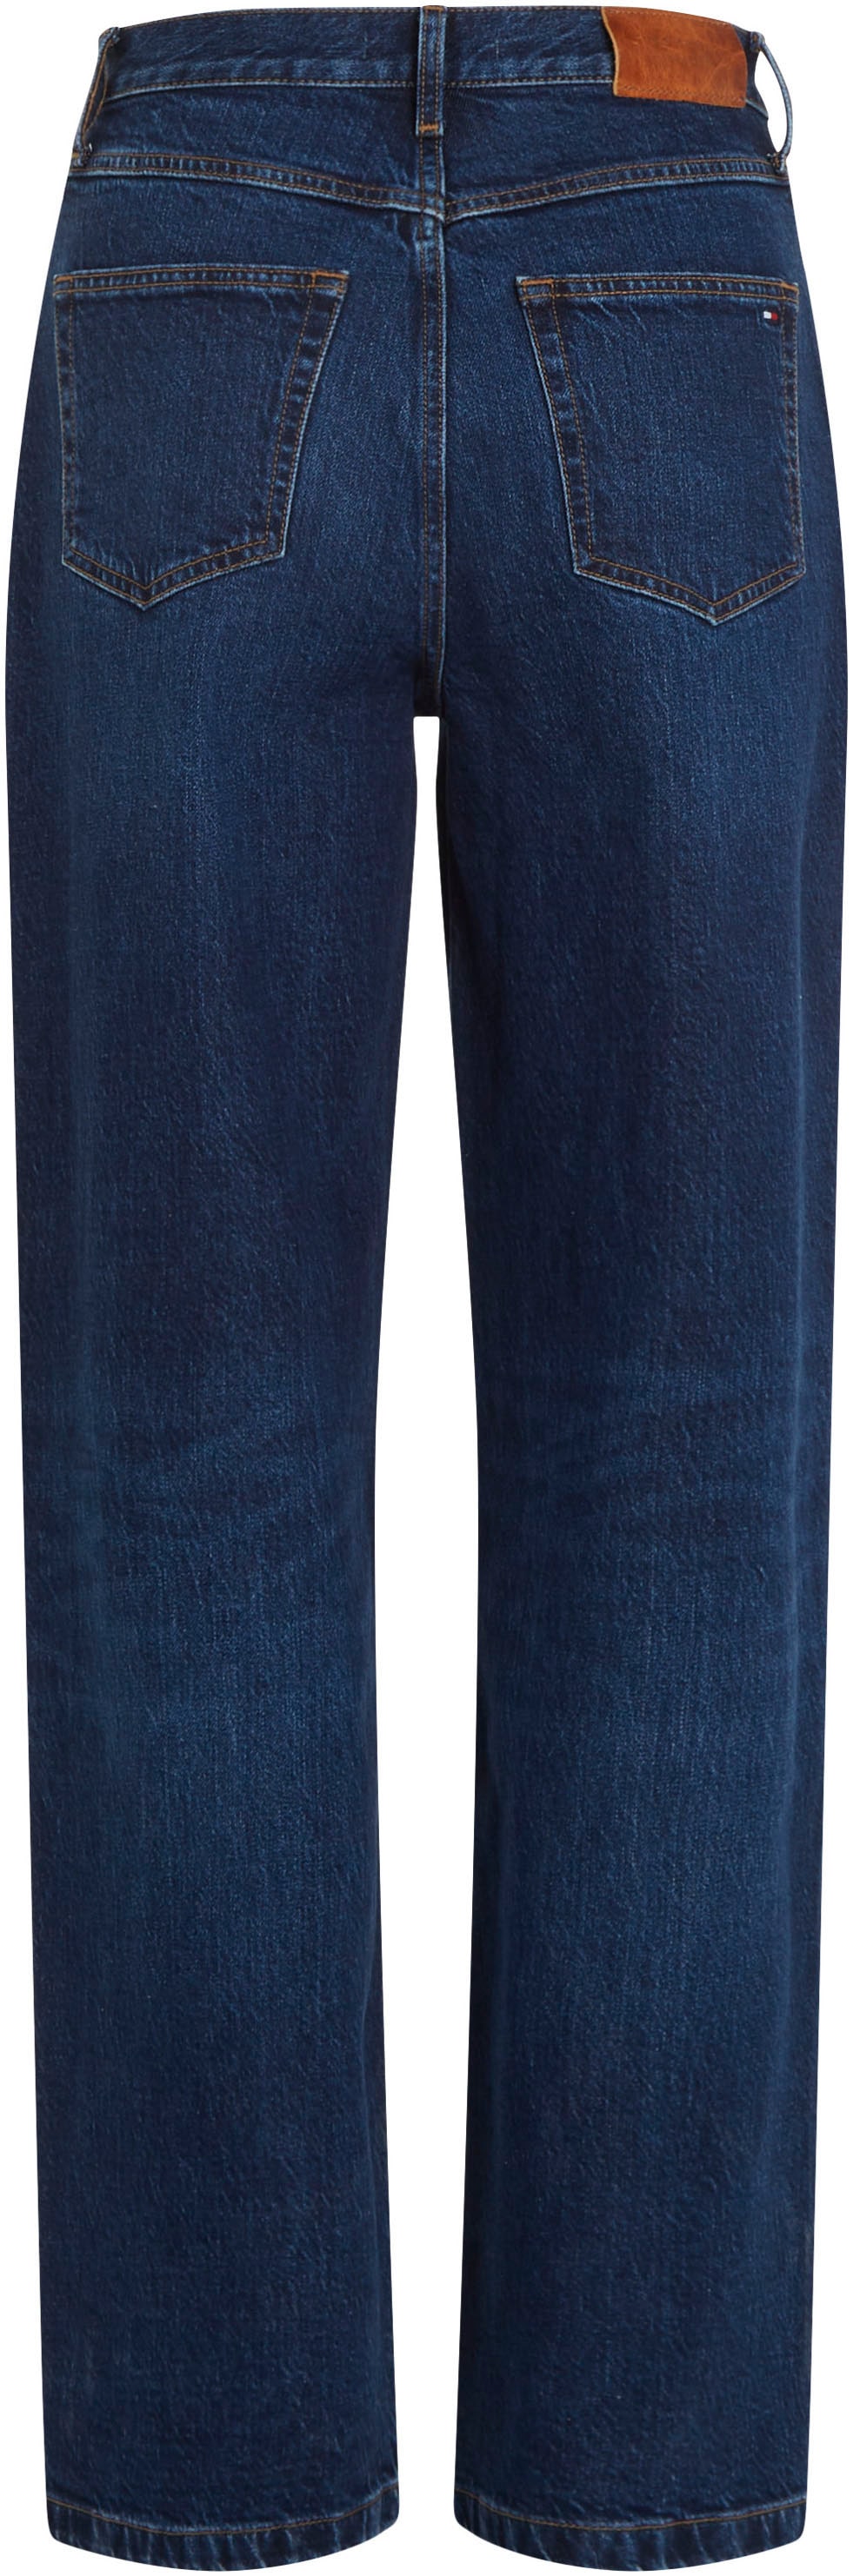 Tommy Hilfiger Relax-fit-Jeans HW »RELAXED kaufen Waschung online in PAM«, weißer STRAIGHT